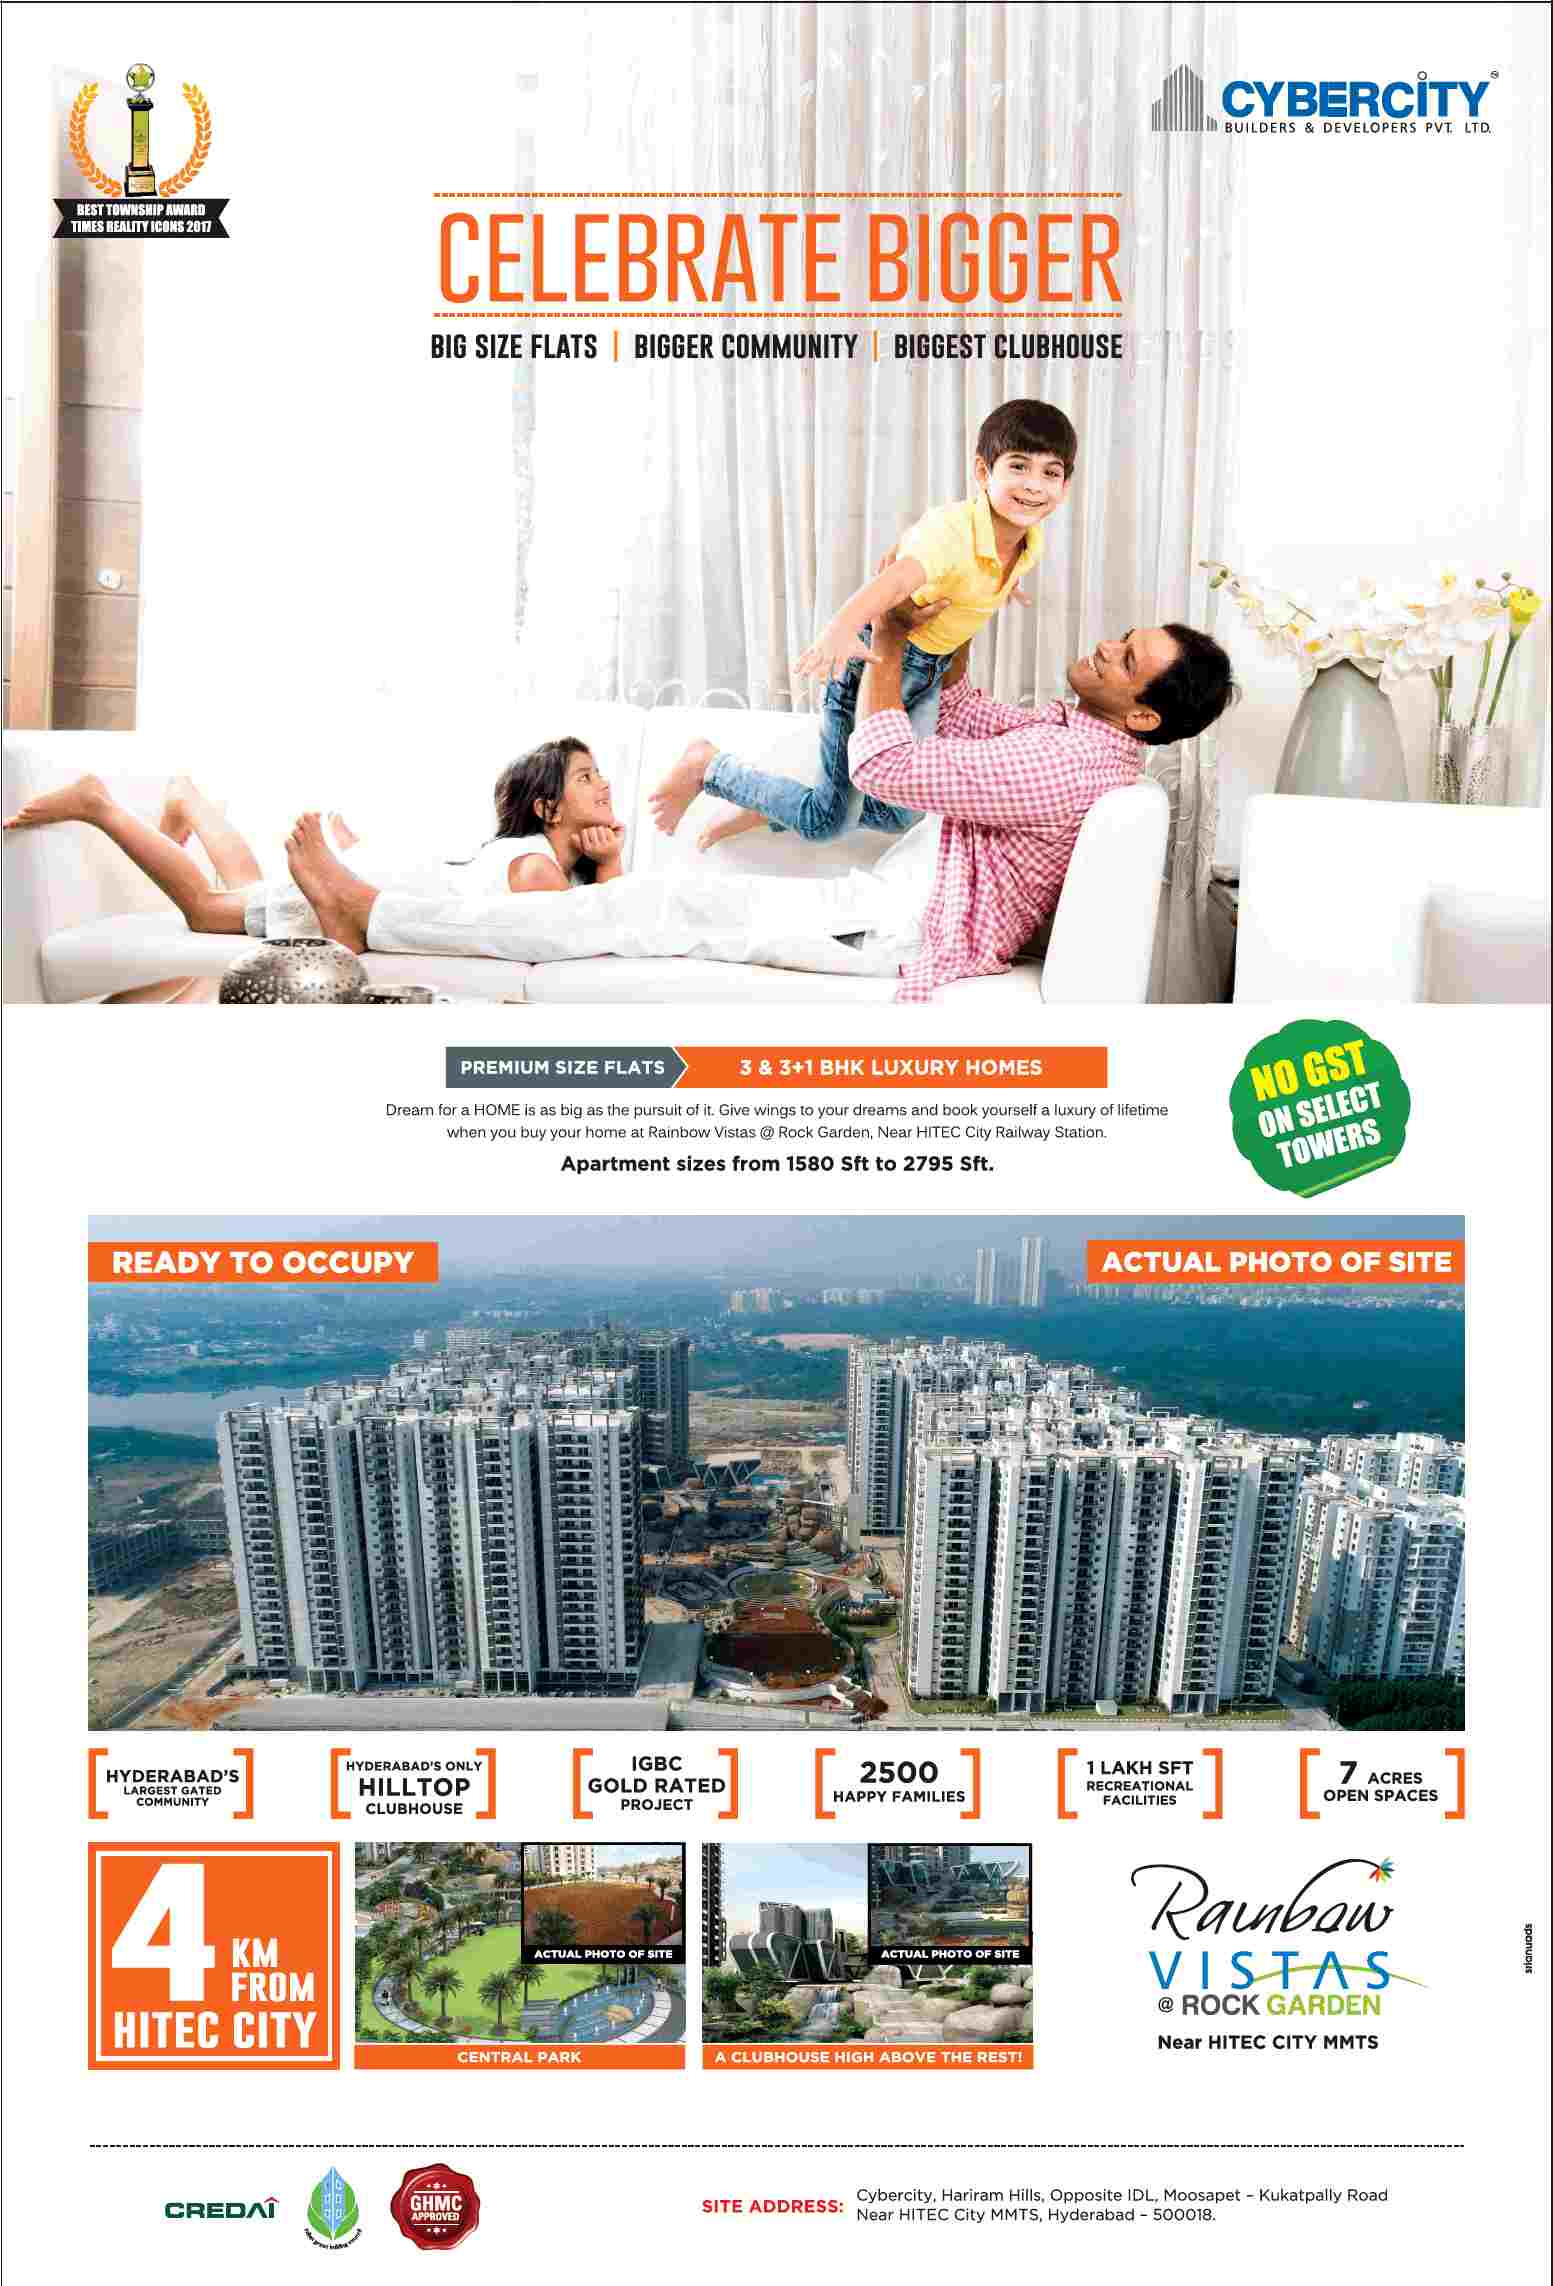 Book yourself a luxury of lifetime at Cybercity Rainbow Vistas in Hyderabad